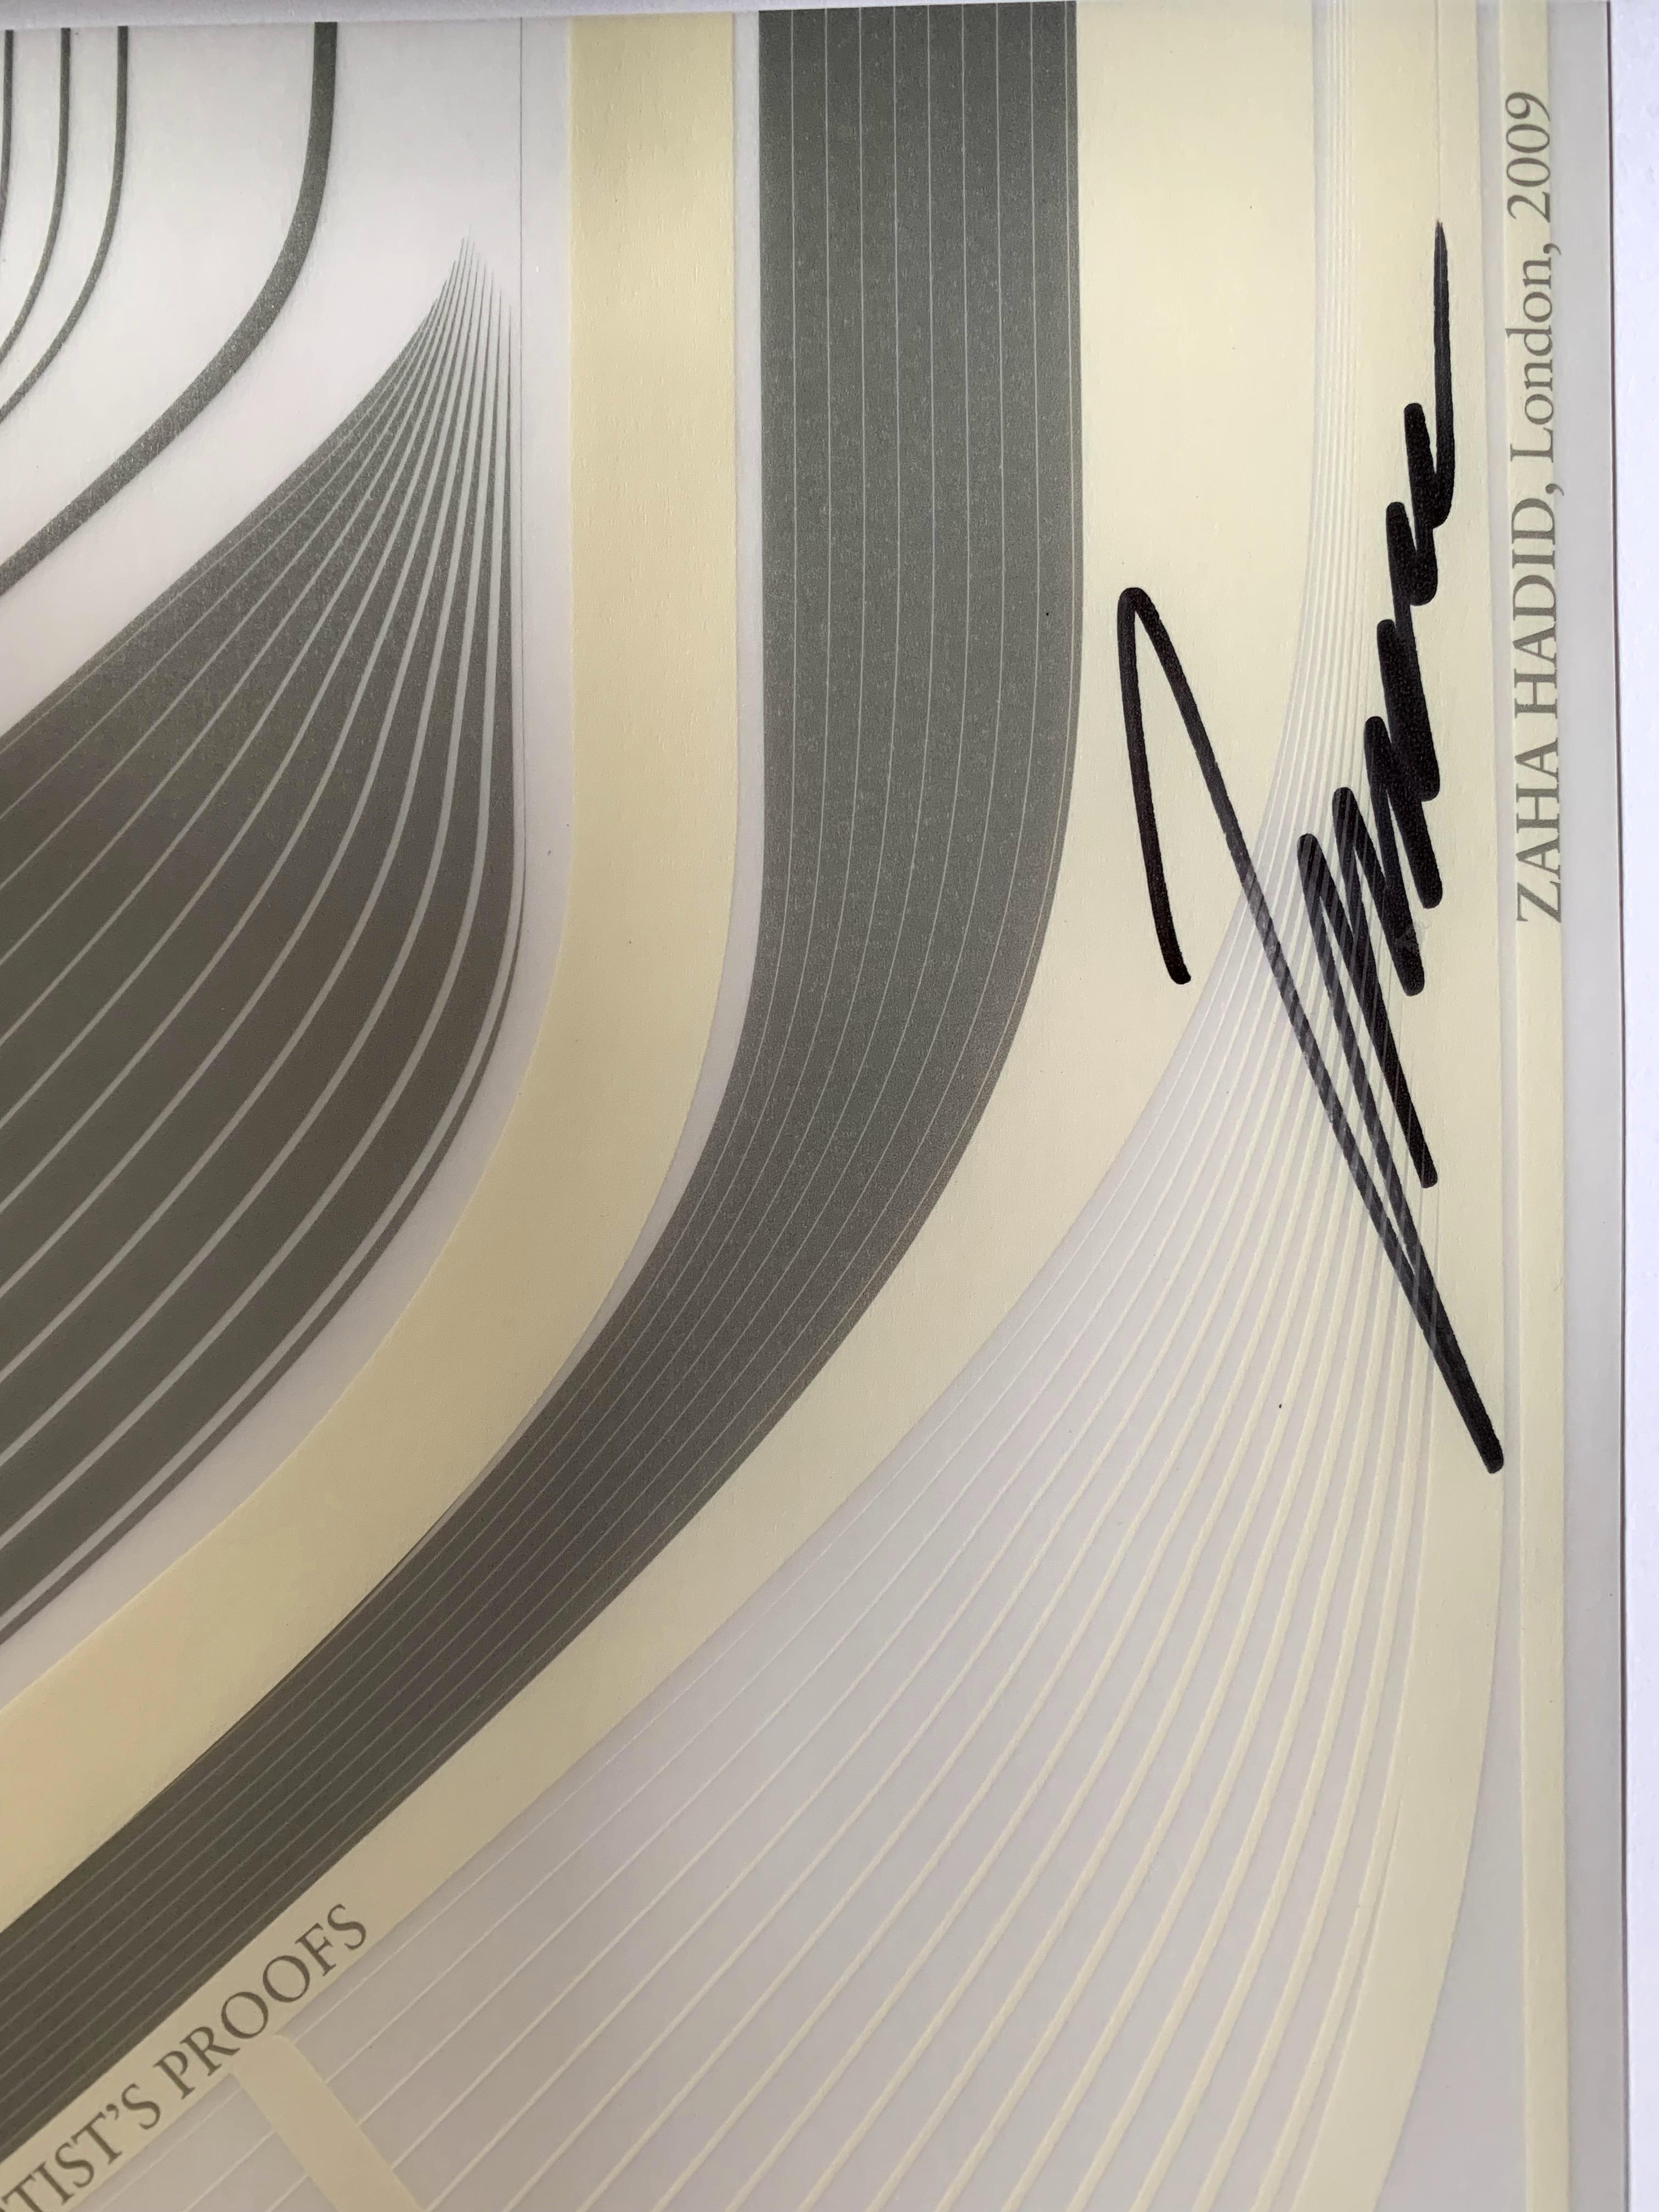 Modern Zaha Hadid Complete Works for Taschen, Signed and Numbered Art Edition, 2009